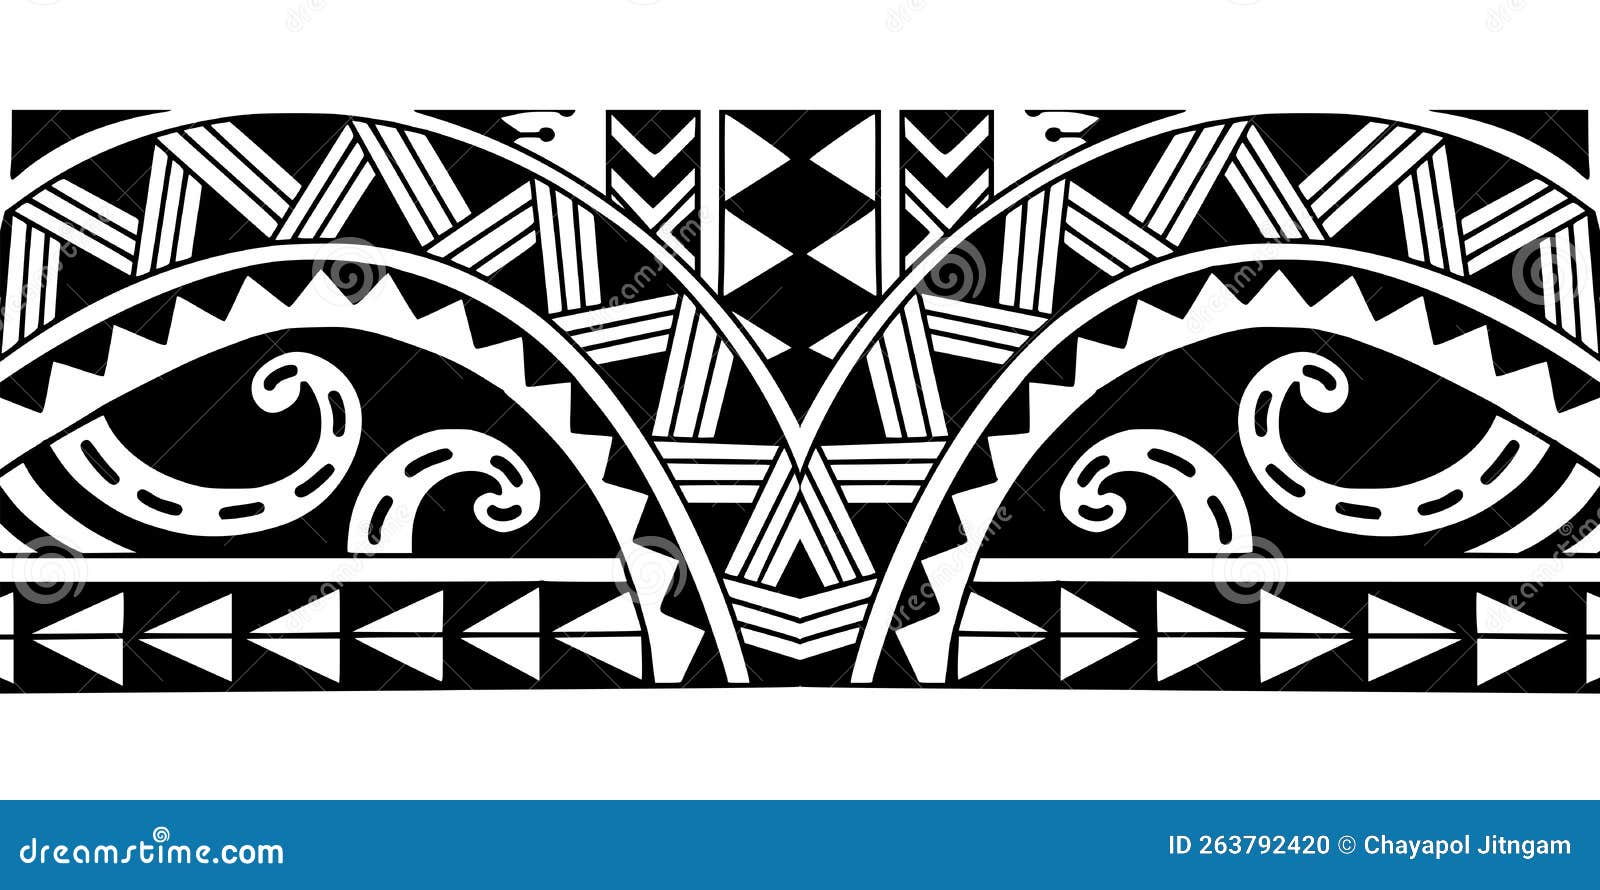 Polynesian tattoo : The sun - Tattoos Adult Coloring Pages